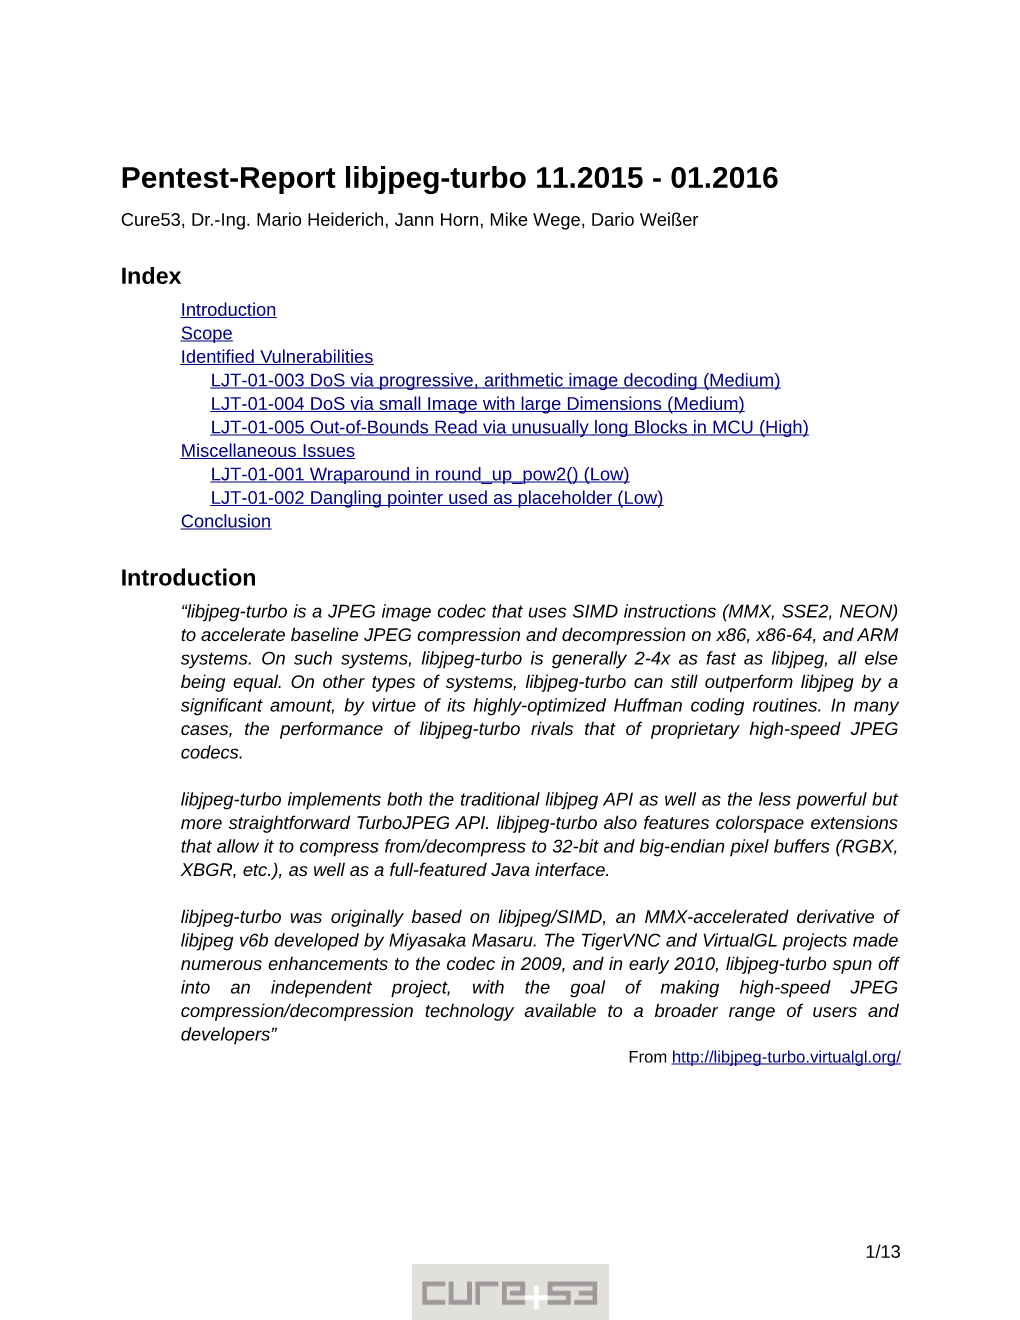 Pentest-Report Libjpeg-Turbo 11.2015 - 01.2016 Cure53, Dr.-Ing